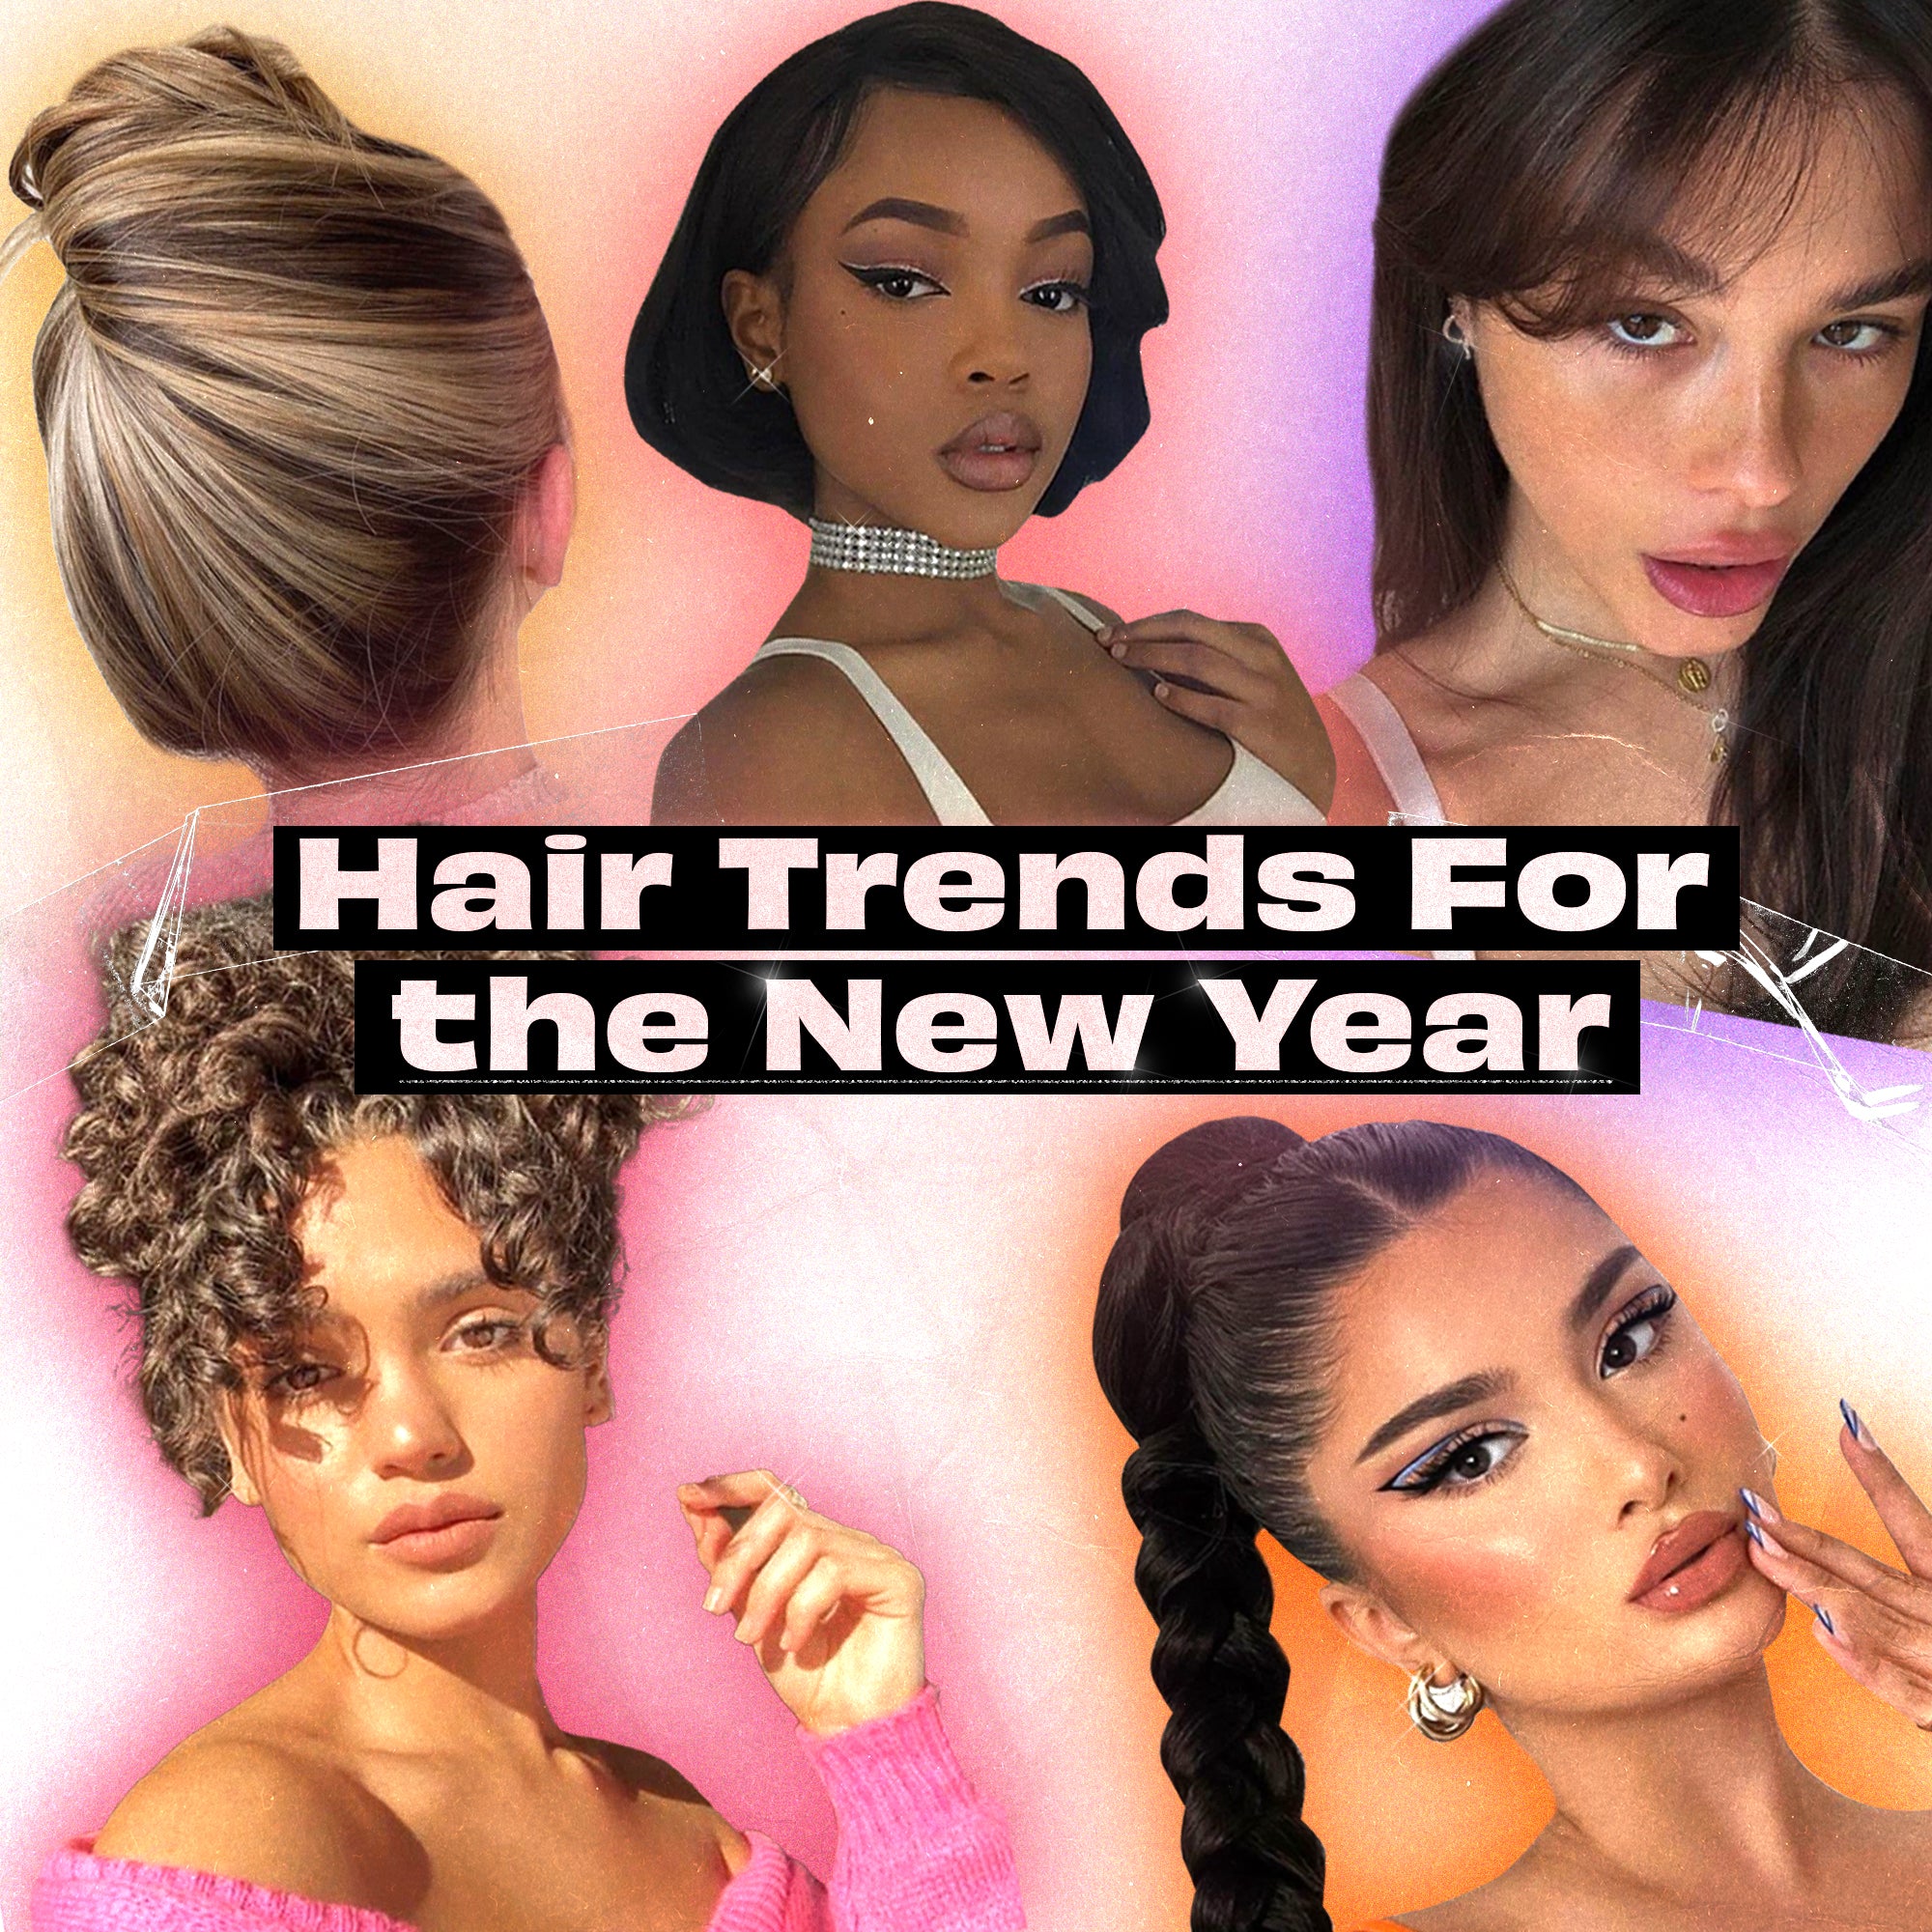 Hair Trends For The New Year image